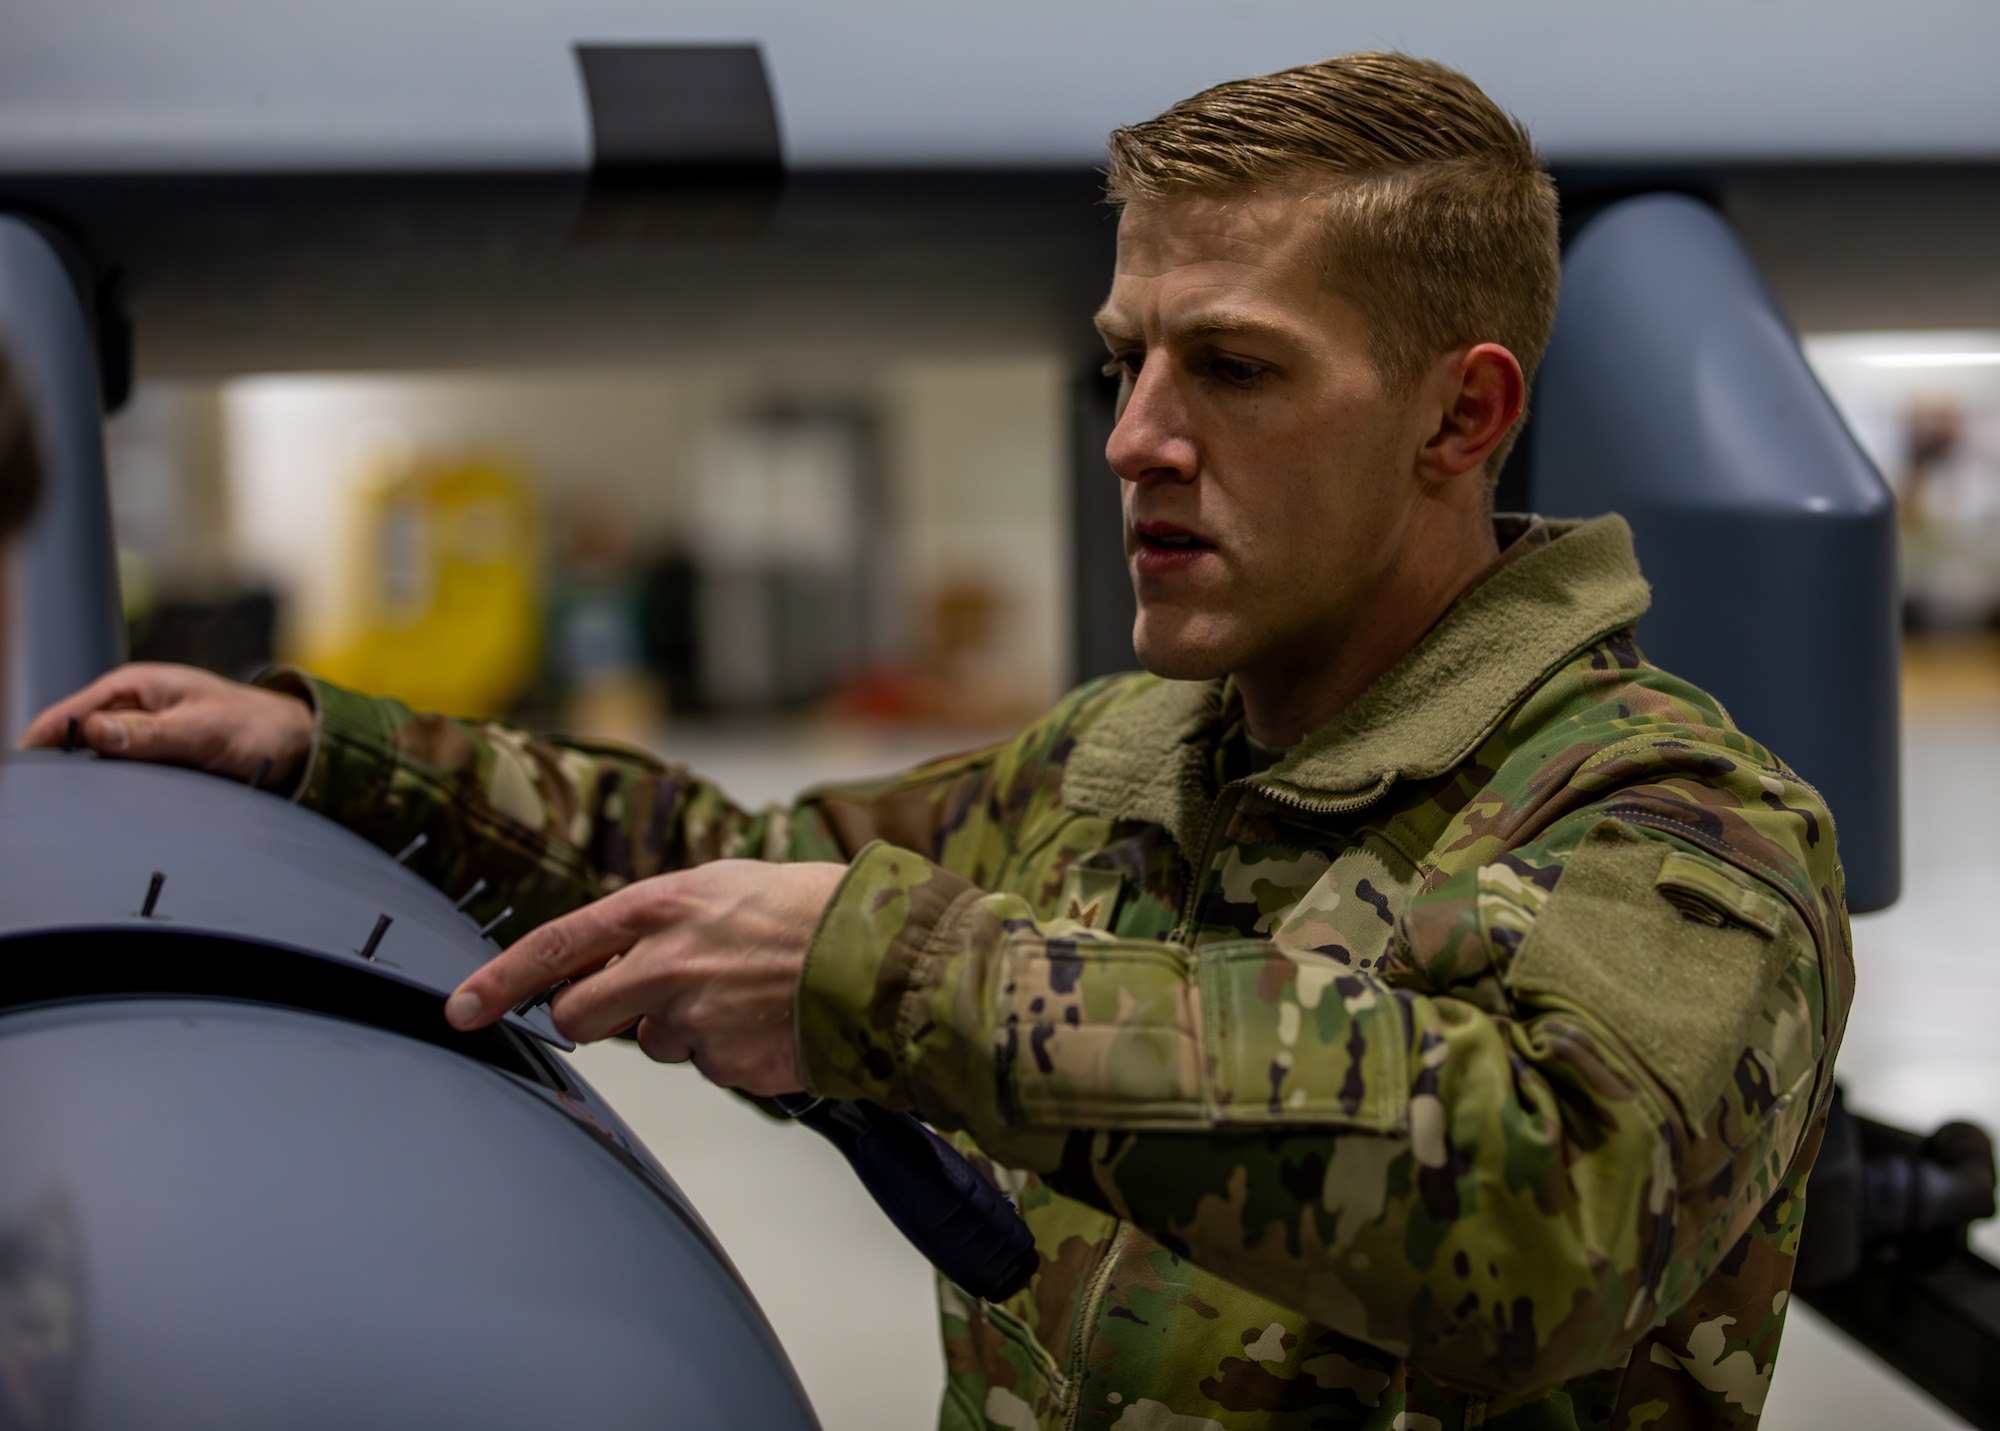 Tech Sgt. Robert Van Wyhe from the 163rd Attack Wing inspects a remotely piloted MQ-9 Reaper from the 163rd Attack Wing at the 178th Wing on Springfield-Beckley Air National Guard Base, Ohio, March 12, 2024. Exercise Advanced Wrath gives the 178th Wing an opportunity to support an MQ-9 Reaper locally with airmen from across the country. (U.S. Army National Guard photo by Staff Sgt. Thomas Moeger)